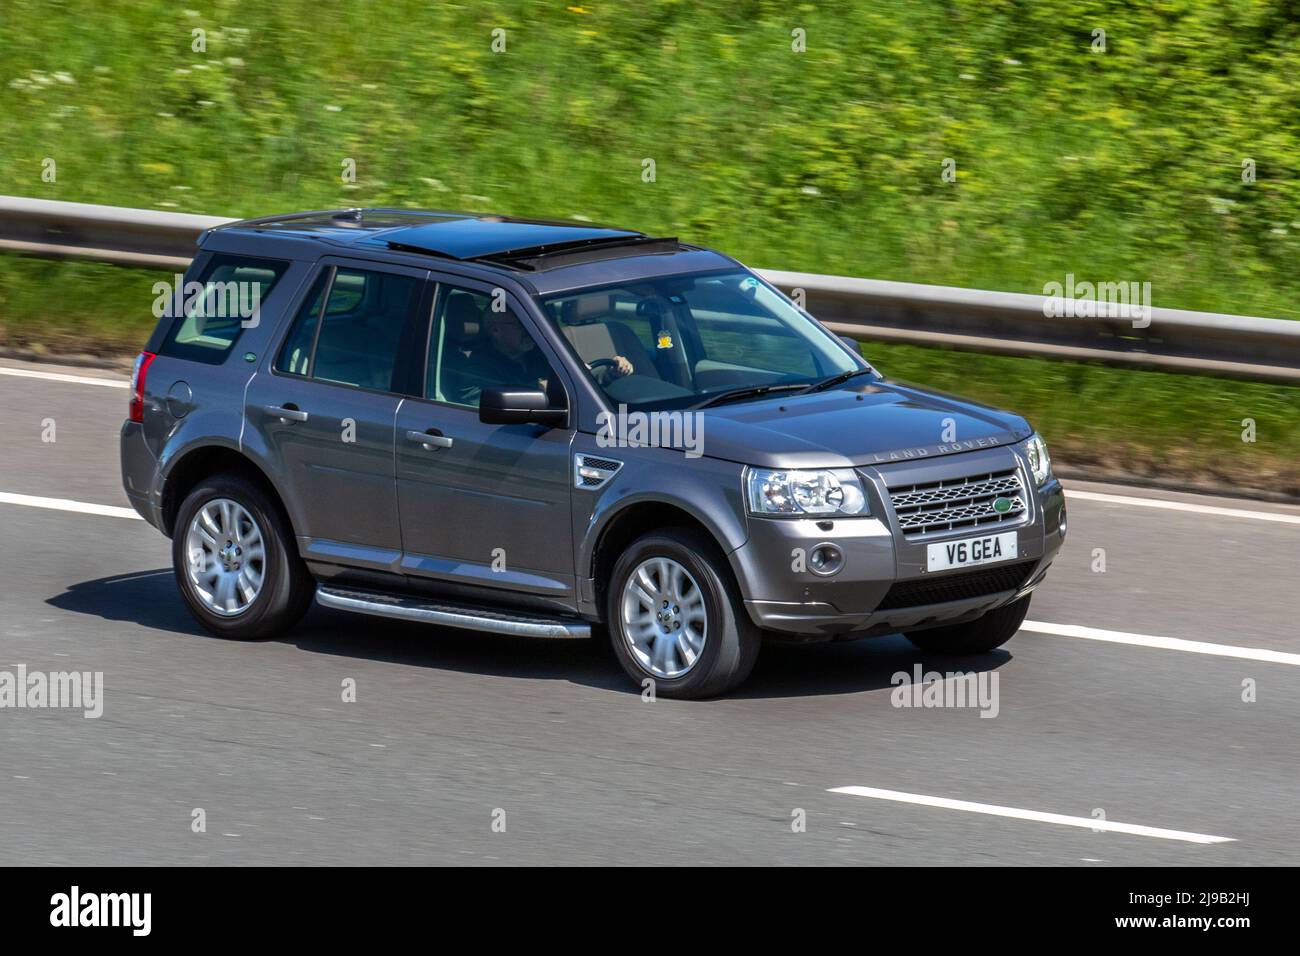 2010 grey LAND ROVER FREELANDER TD4 GS, compact crossover SUV 2179cc Diesel; driving on the M6 Motorway, Manchester, UK Stock Photo